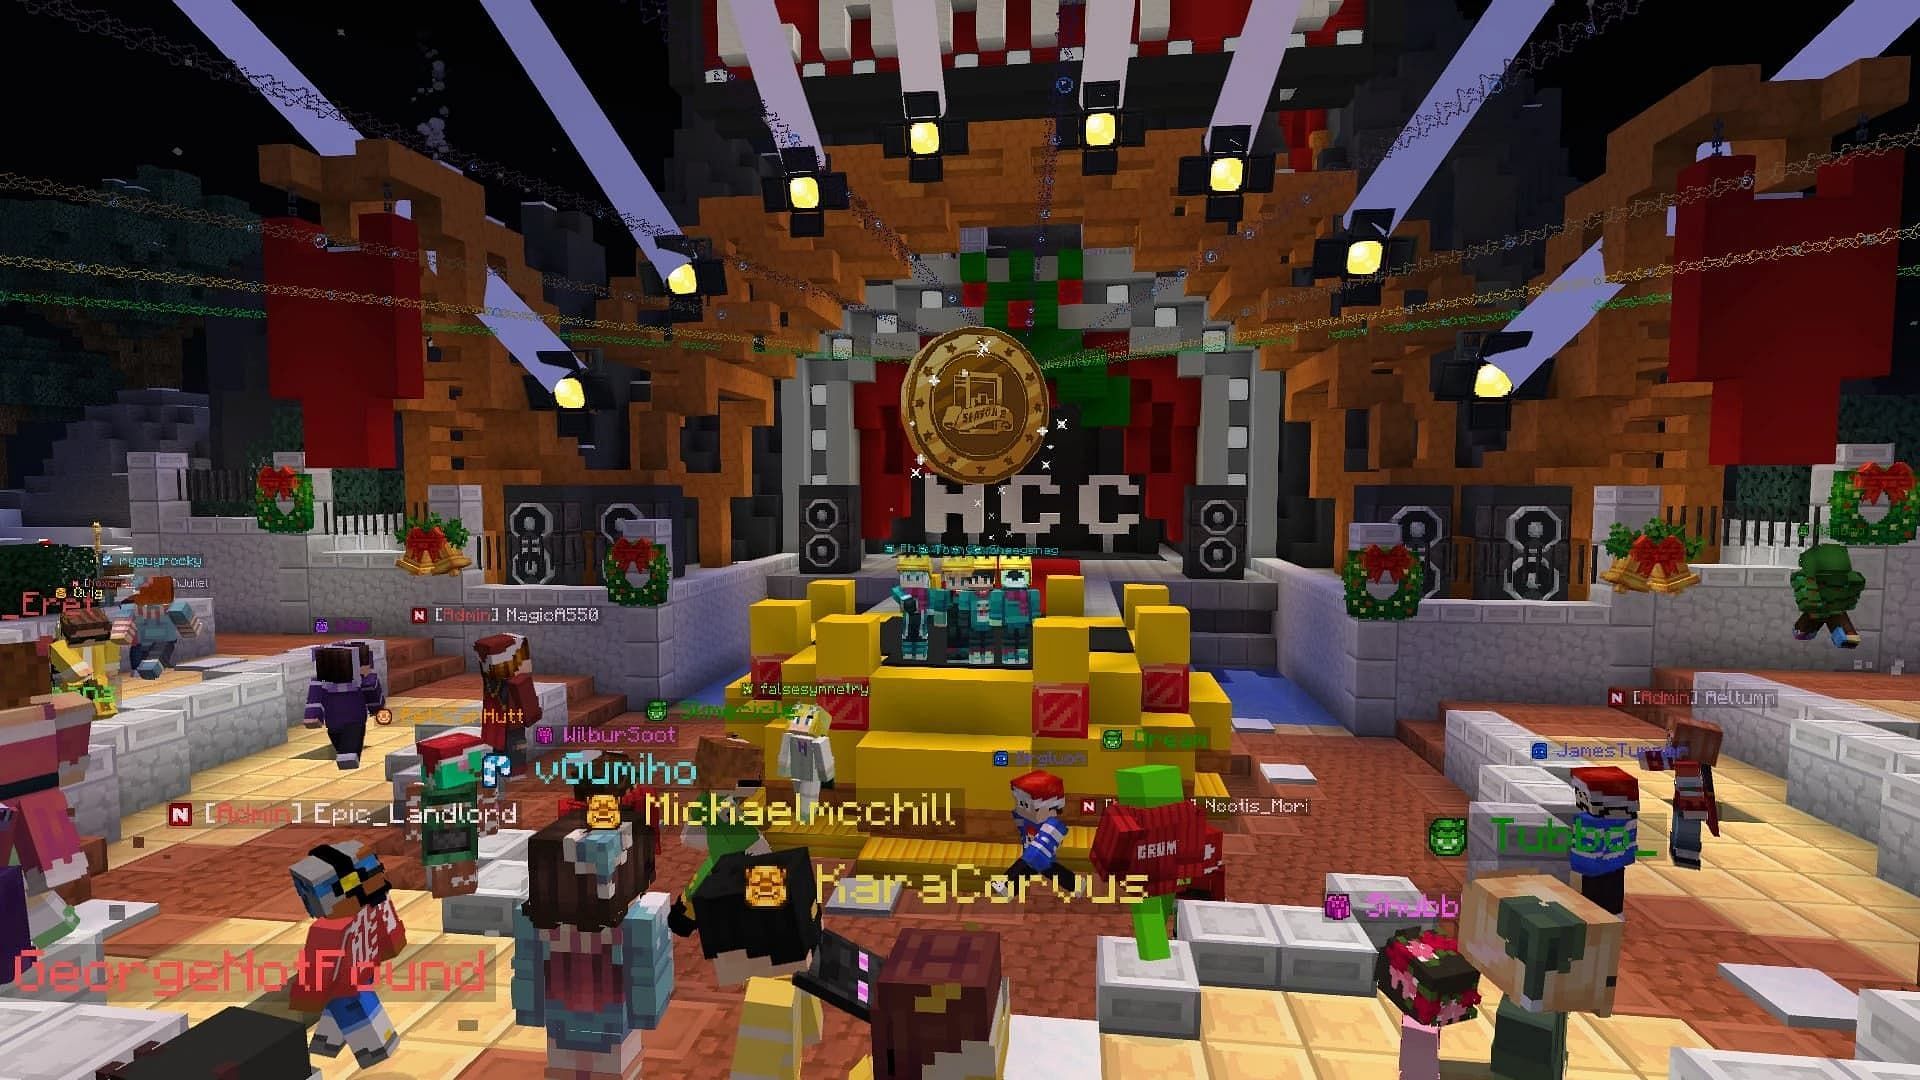 Winners of the event get to celebrate in an exciting ceremony (Image via mcchampionship.fandom.com)